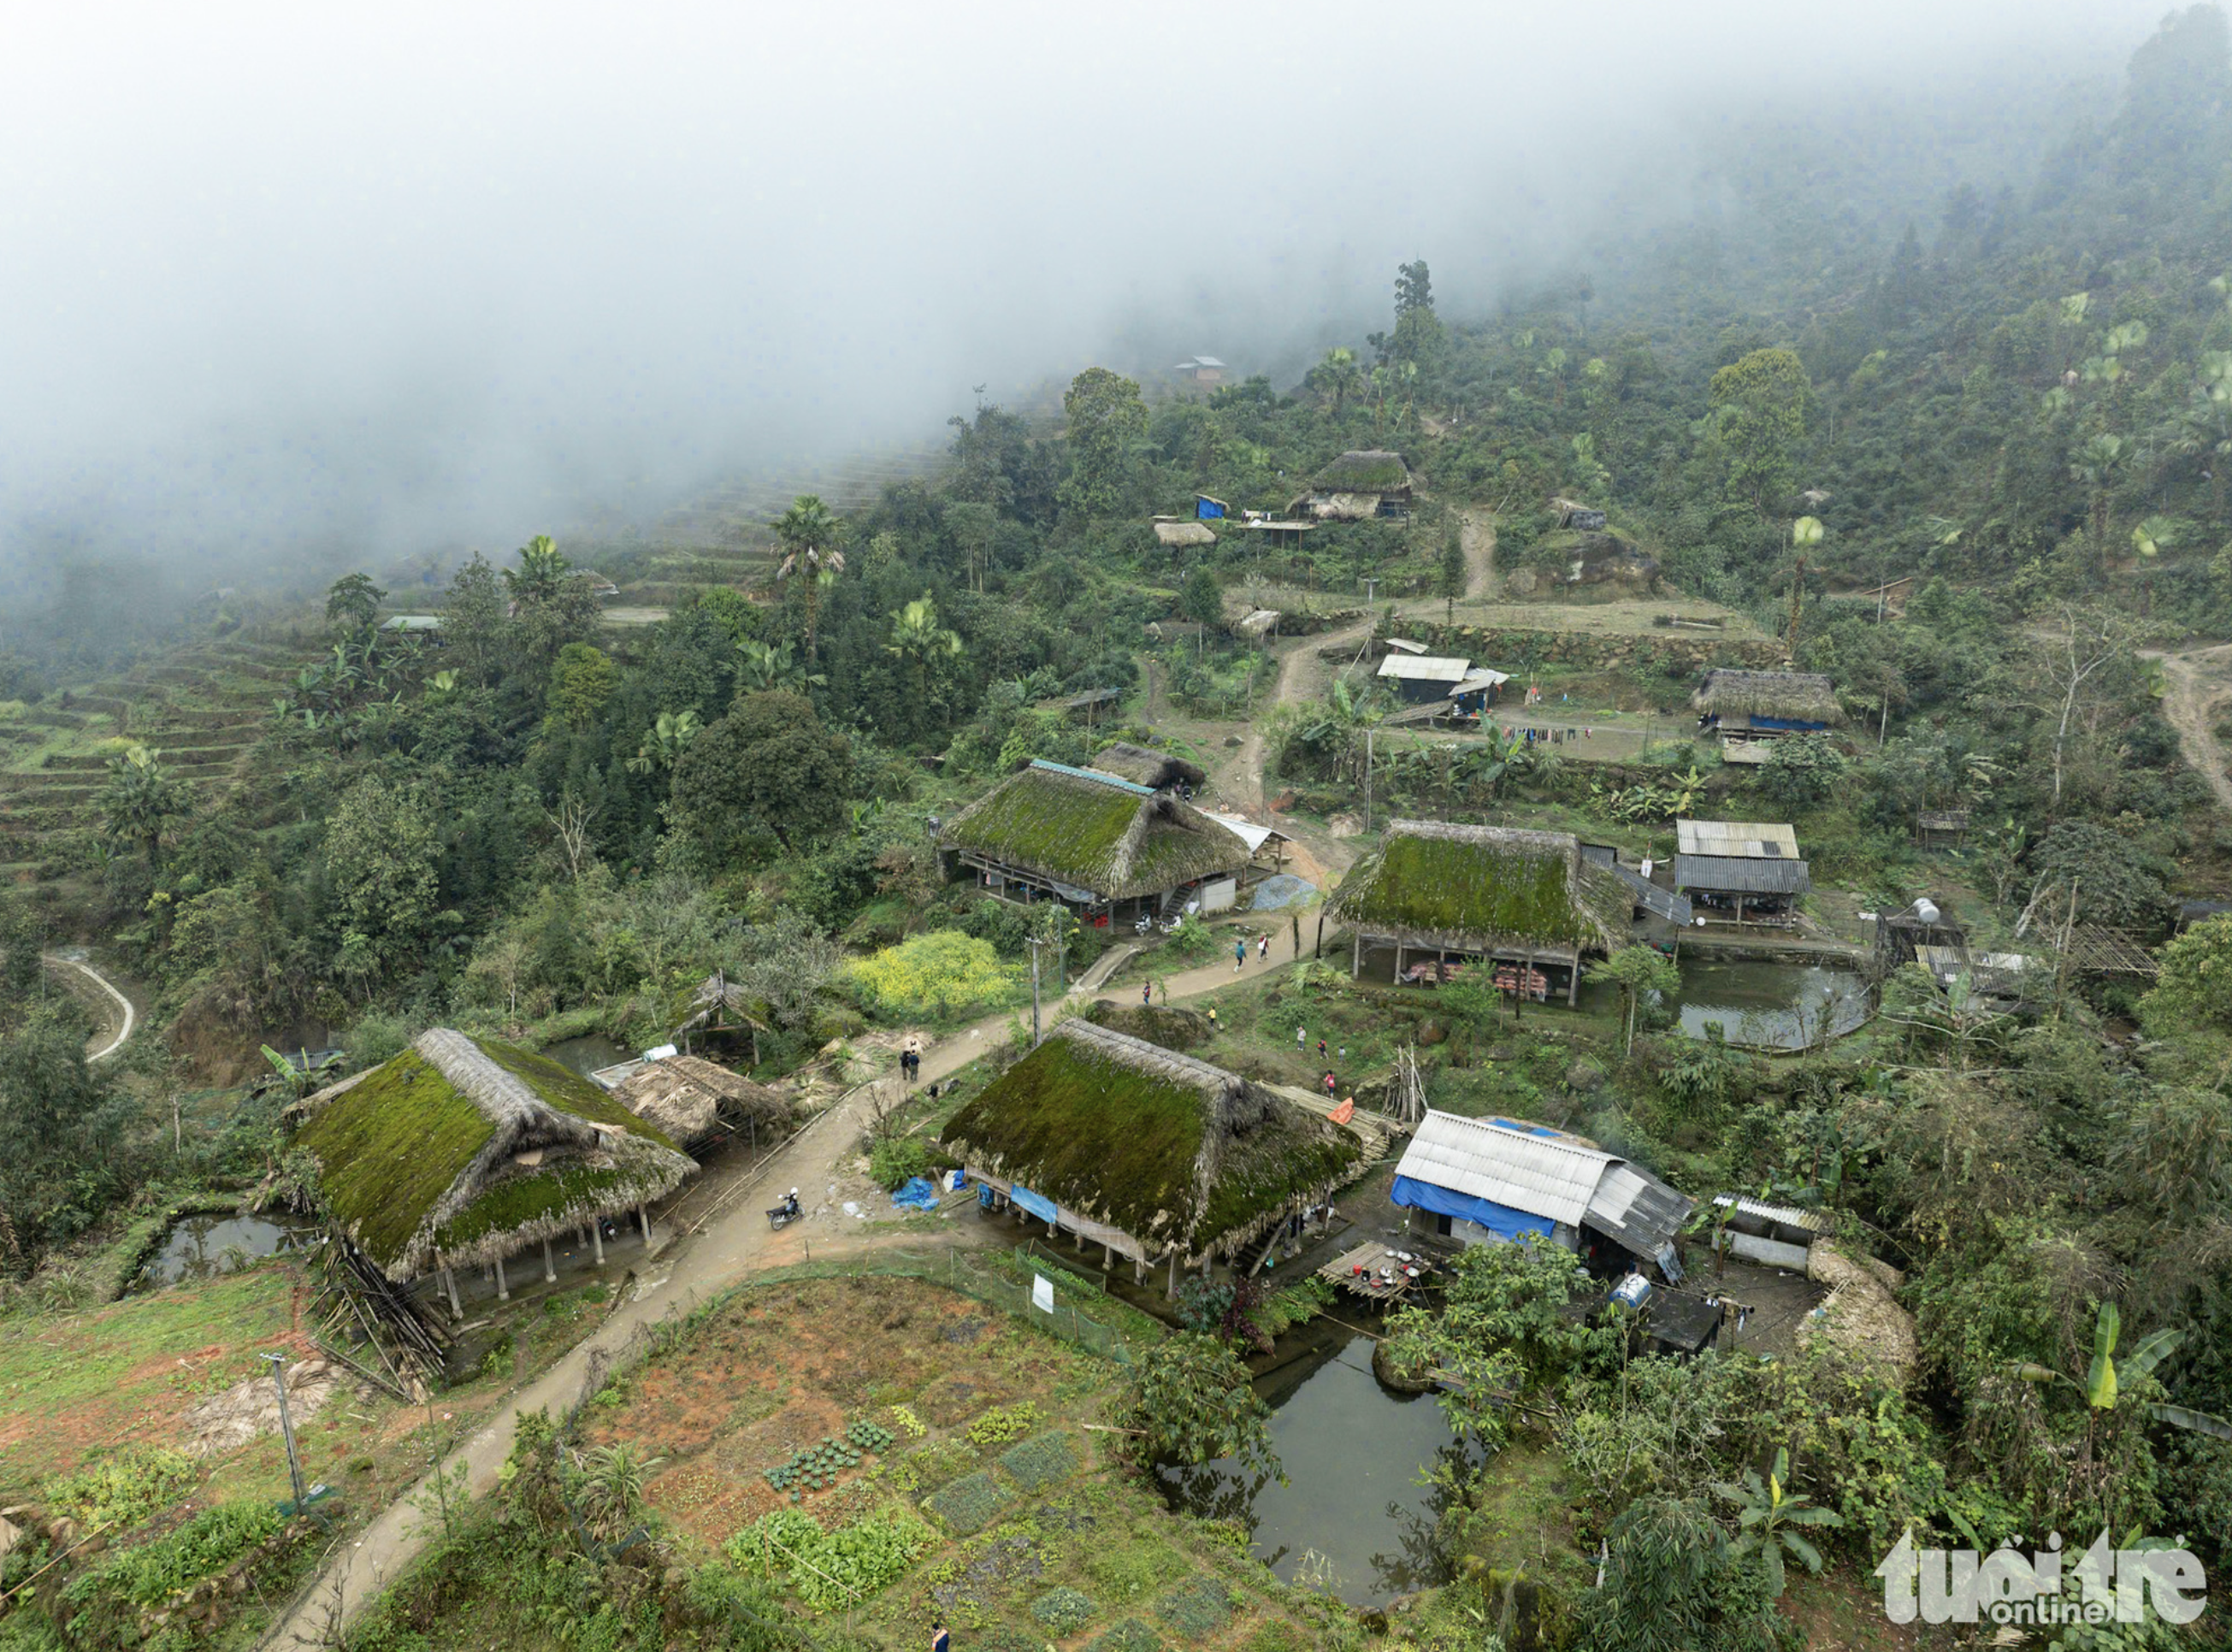 High humidity helps moss develop well on house roofs in Xa Phin Mountainous Village in Vi Xuyen District under Ha Giang Province, northern Vietnam. Photo: Nam Tran / Tuoi Tre